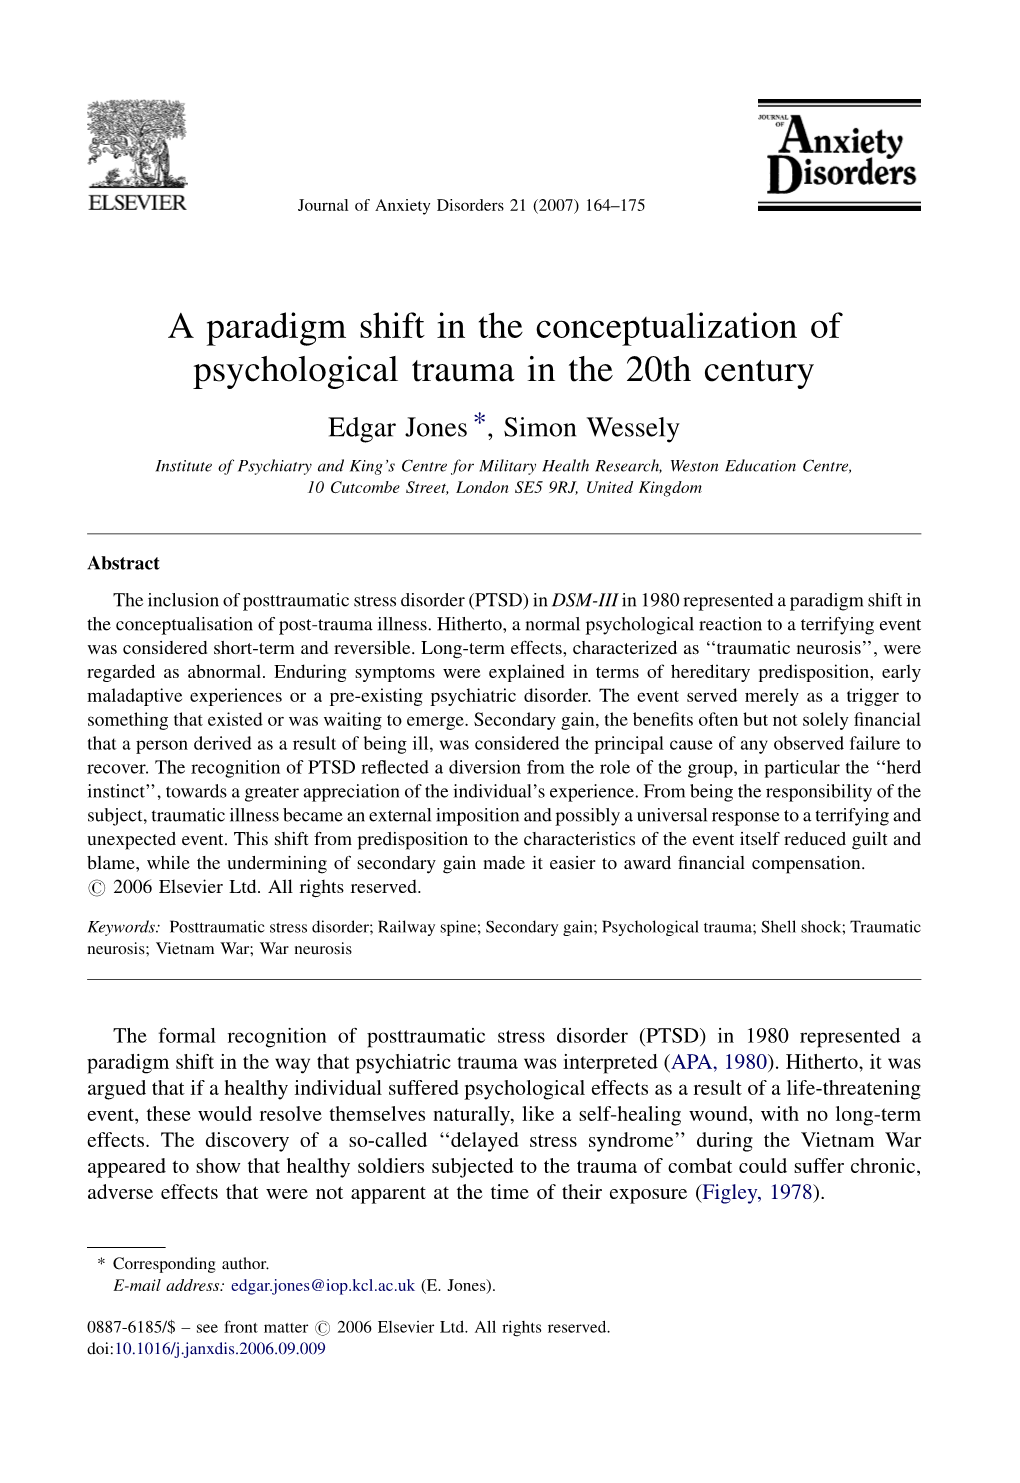 A Paradigm Shift in the Conceptualization of Psychological